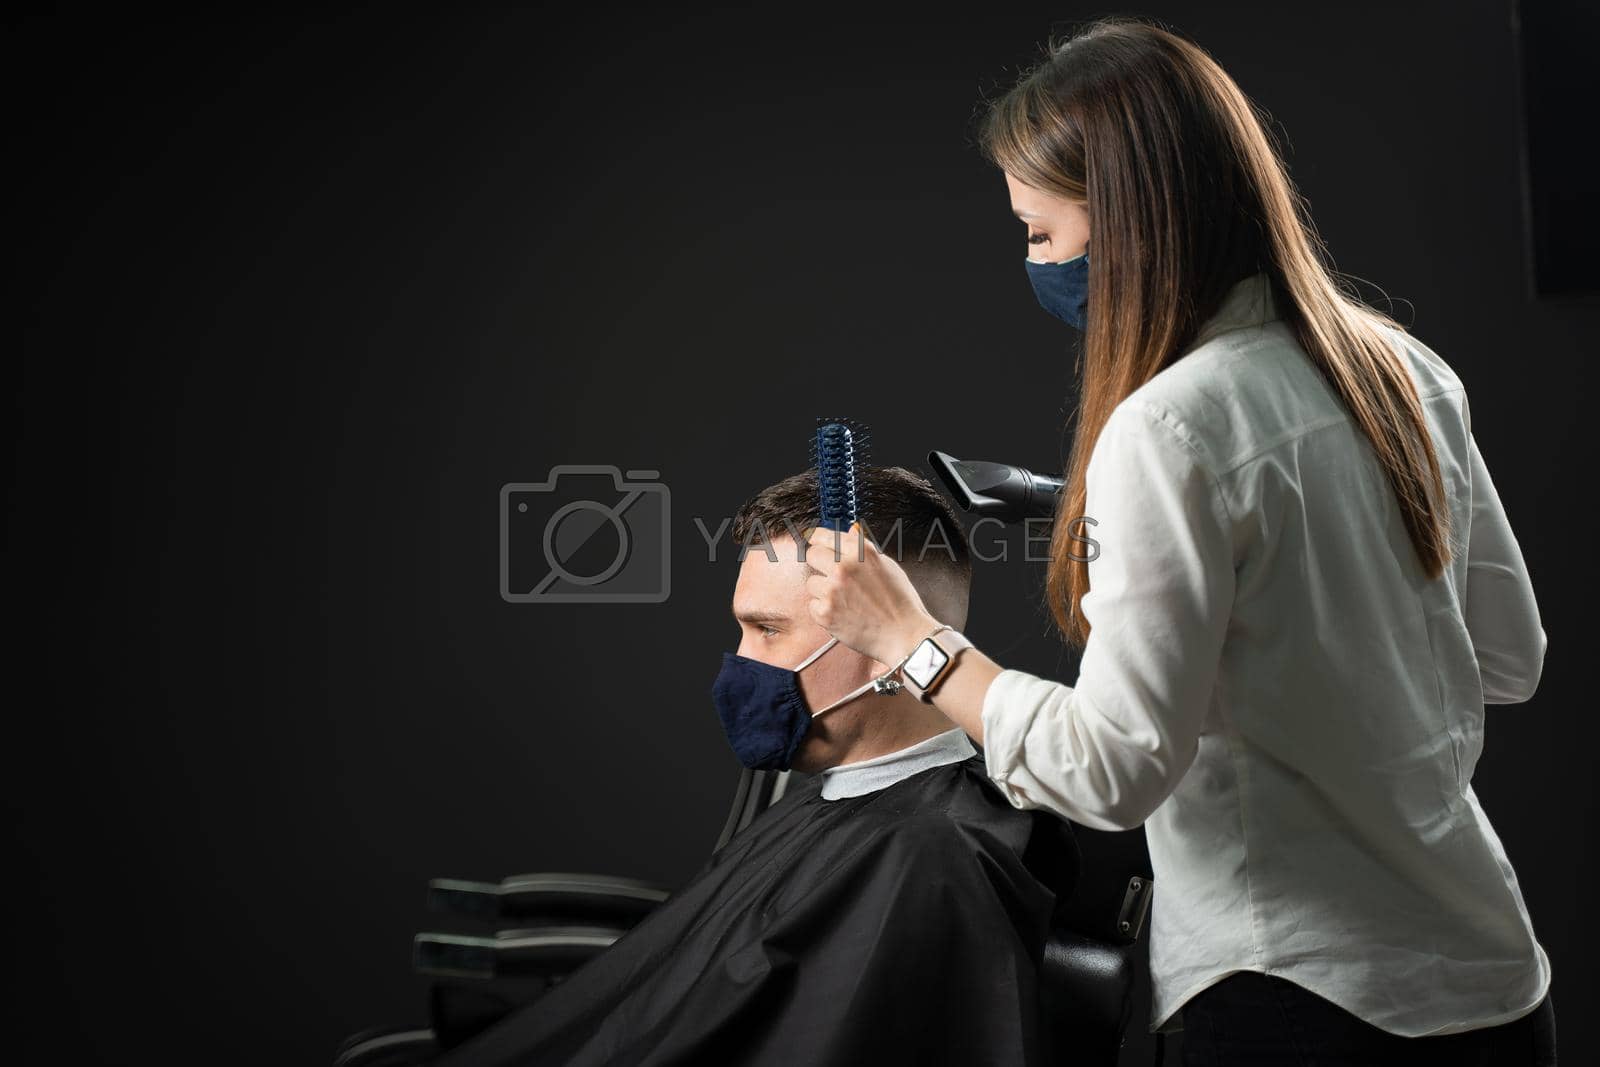 Royalty free image of Barbershop service at coronavirus covid-19 period. Drying hair after cutting in barbershop for handsome man. Using mask. by Rabizo